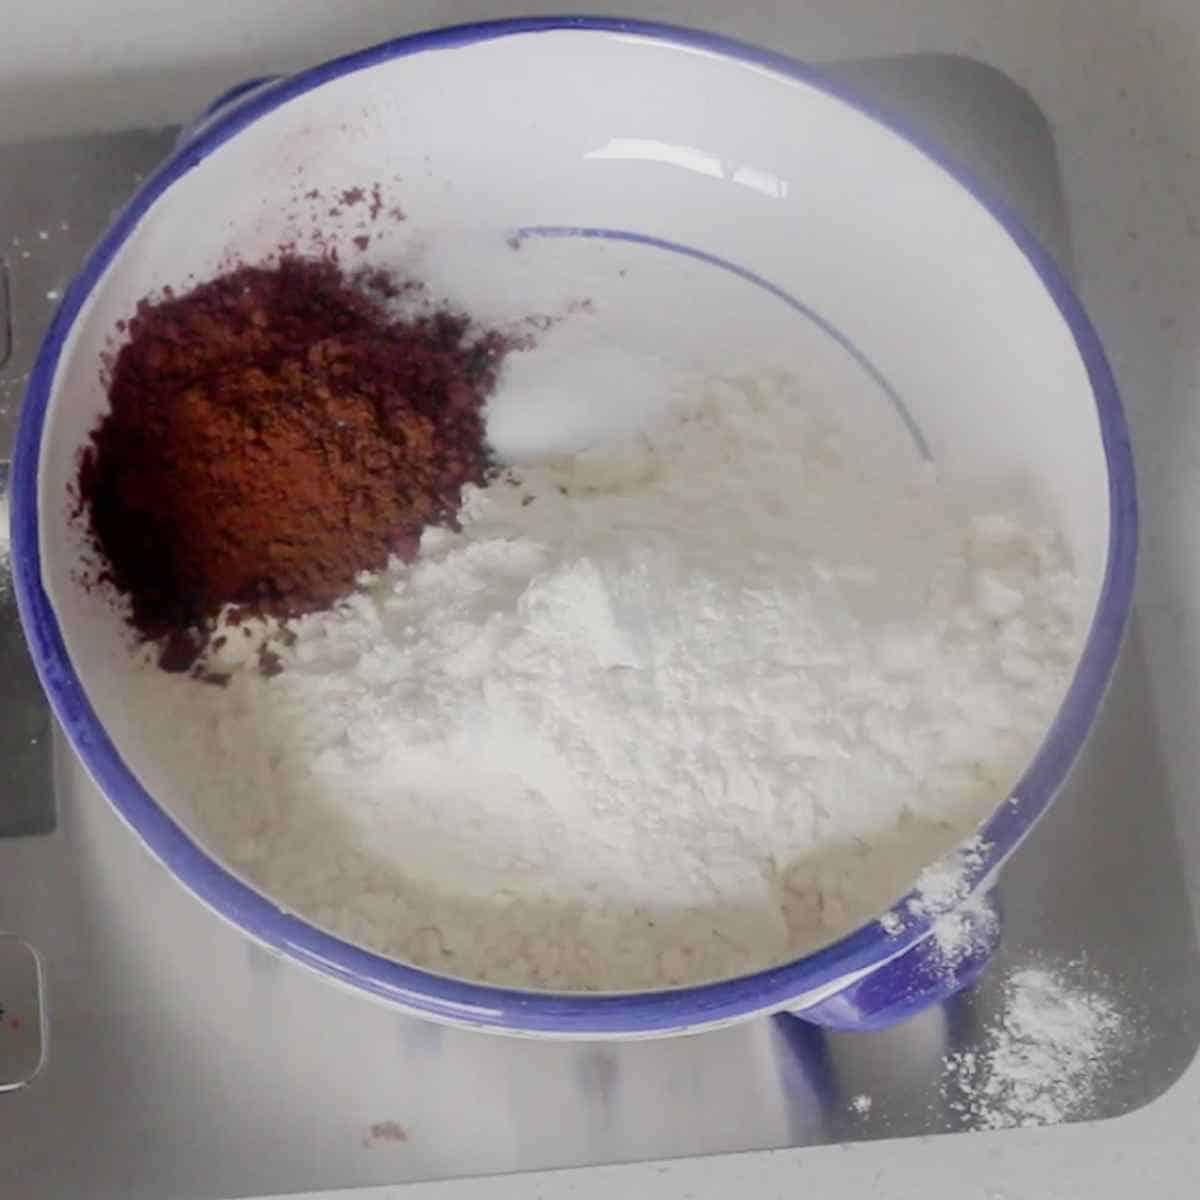 weigh out the dry ingredients in a small bowl